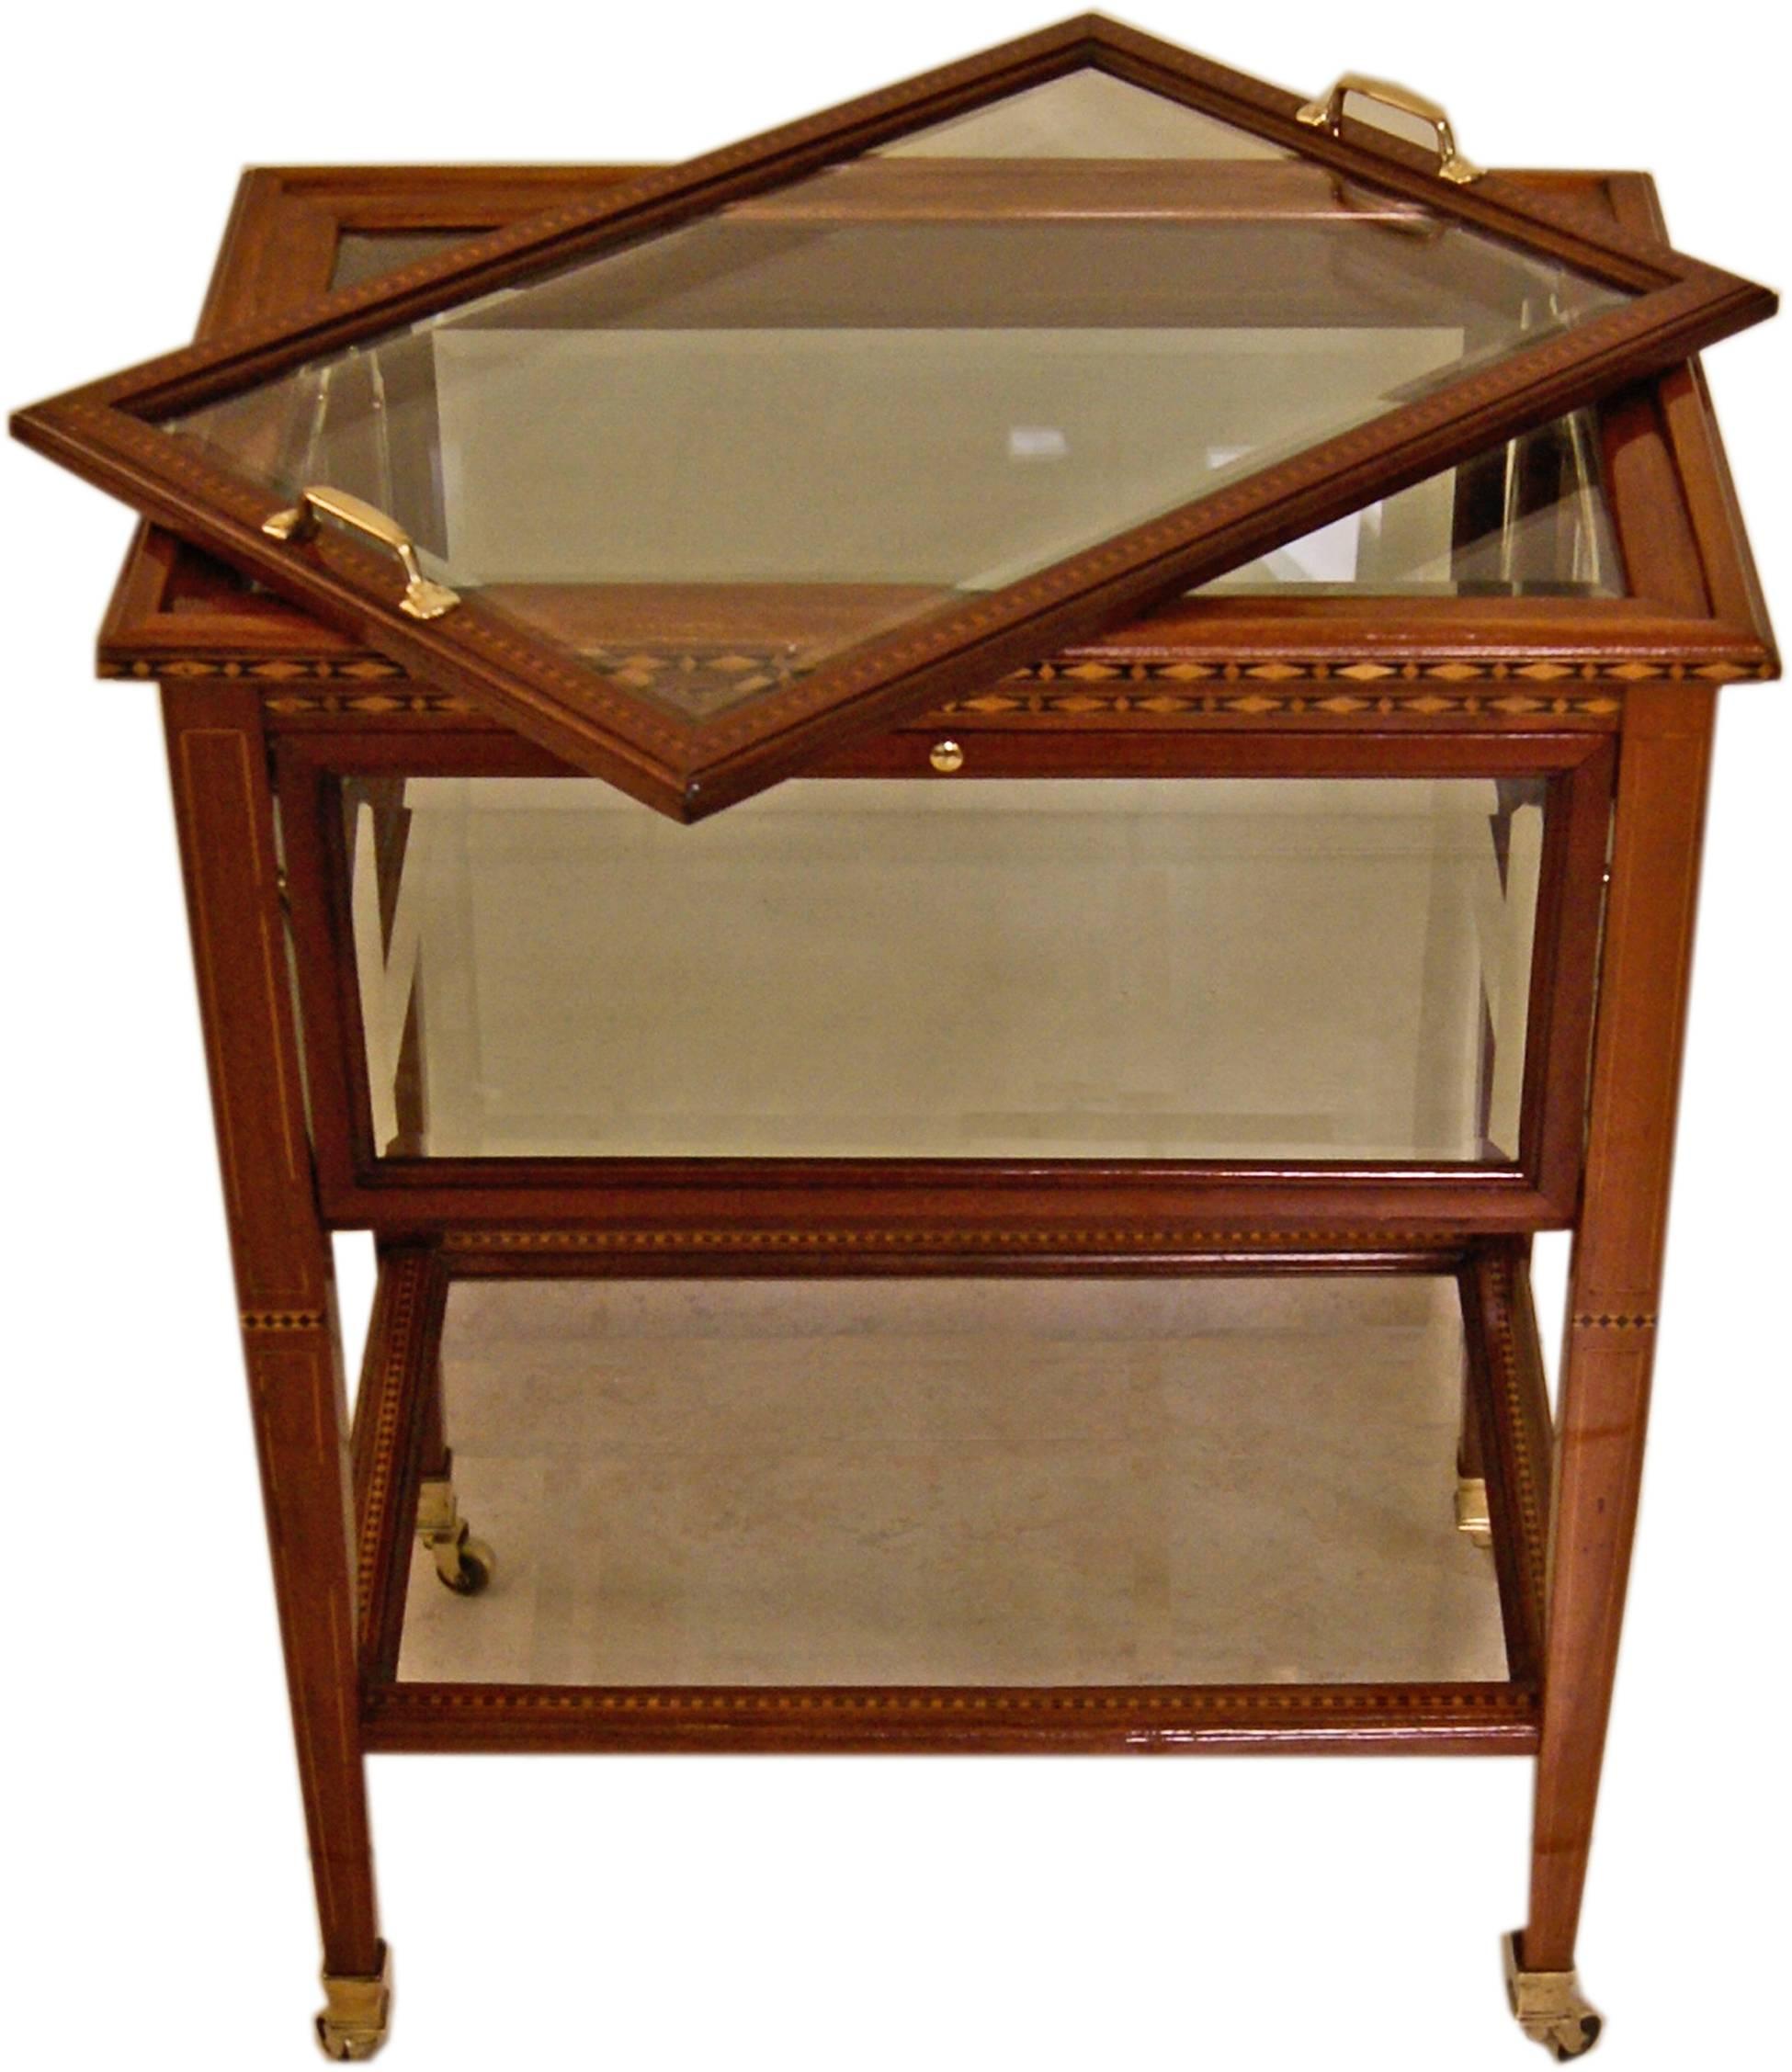 Early 20th Century Vienna Art Nouveau Serving Trolley Bar Cart Mahogany with Inlays, circa 1900